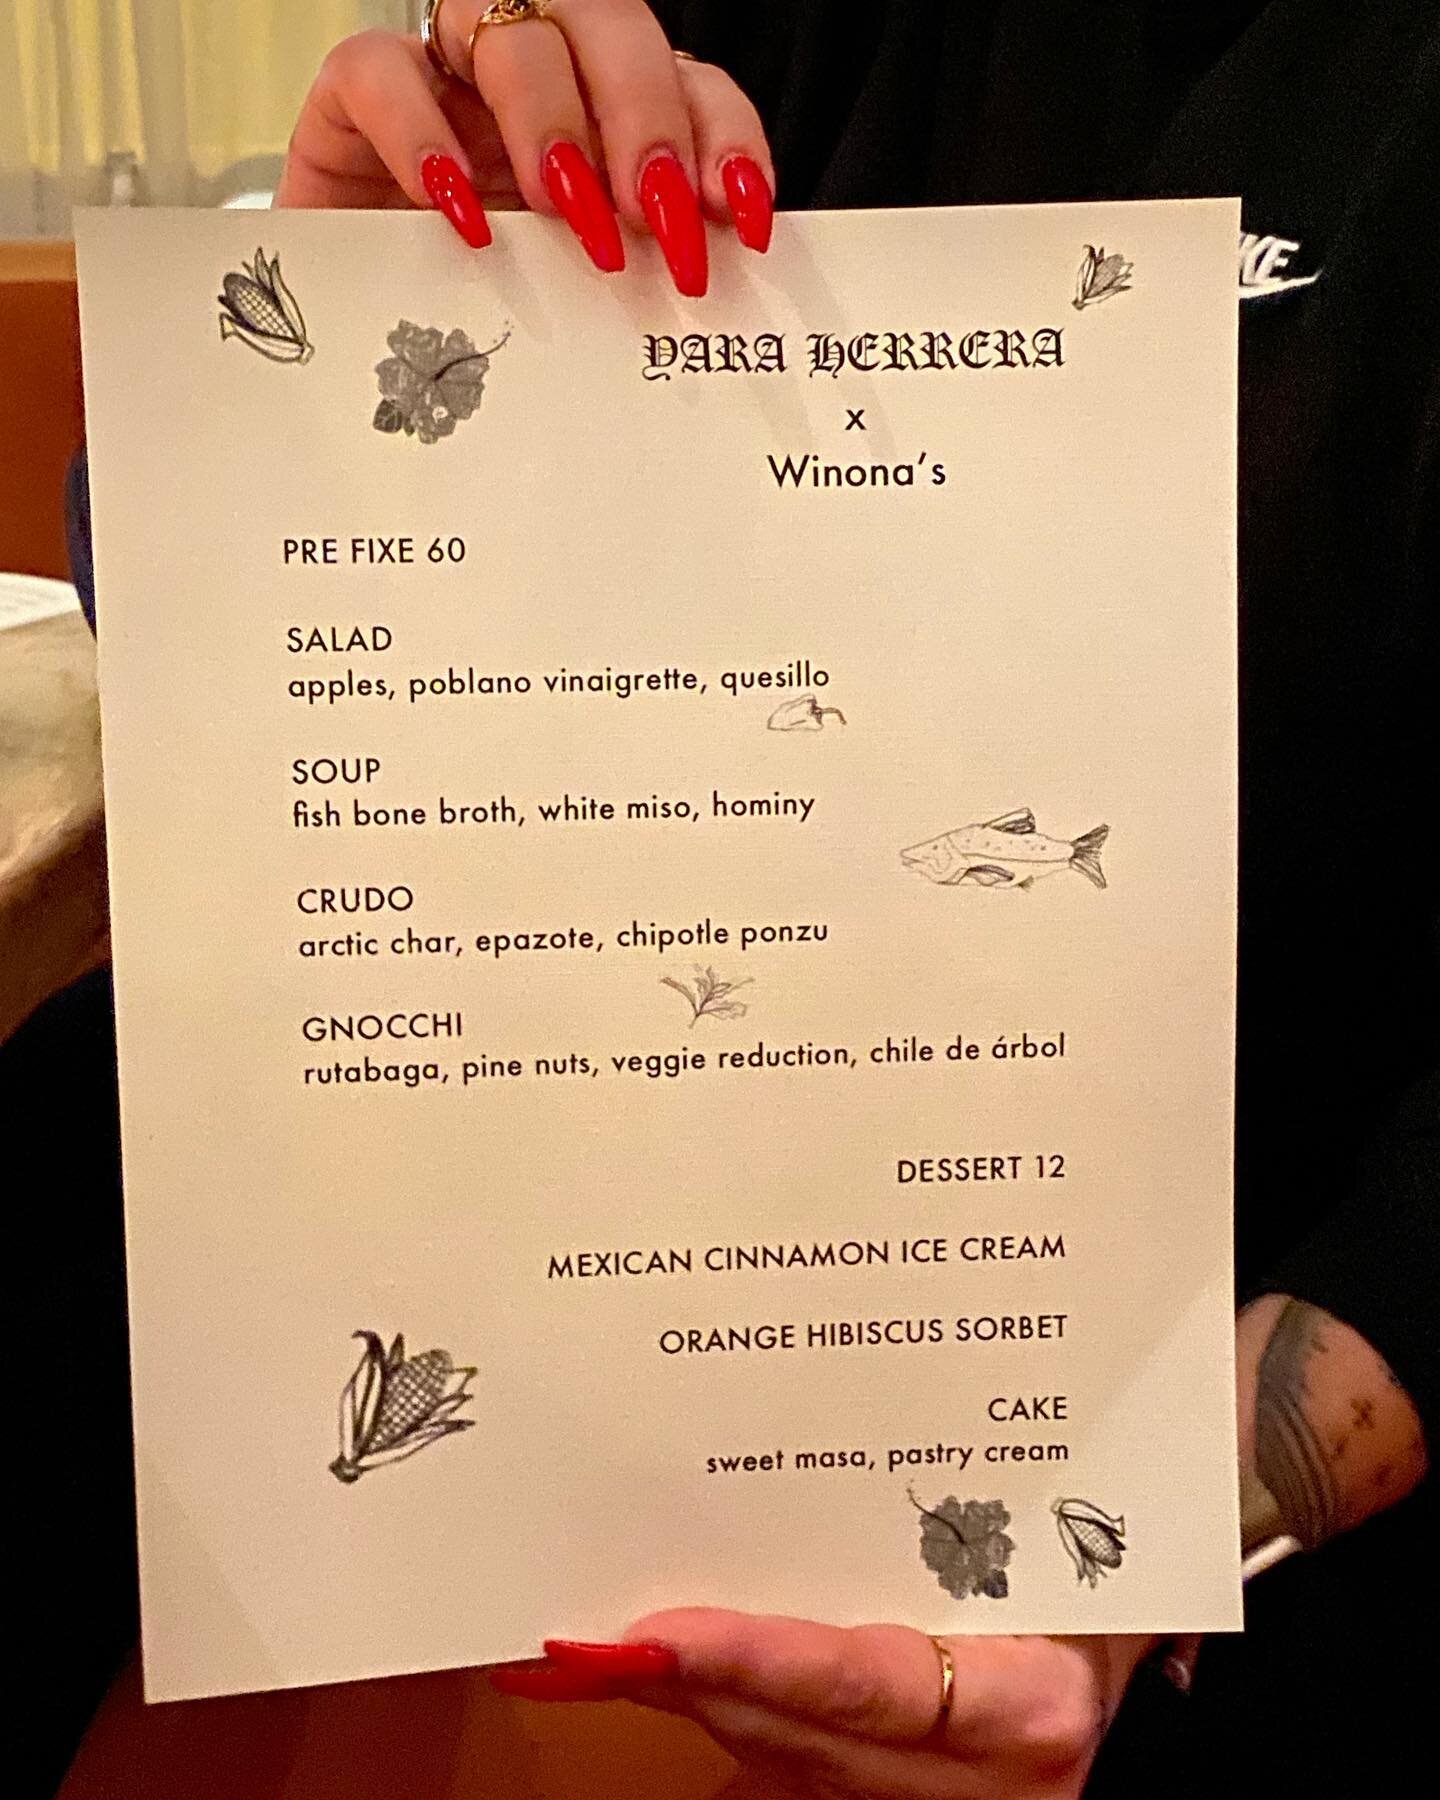 Designed this QT menu for 𝔜𝔄&real;𝔄 ℌ𝔈&real;&real;𝔈&real;𝔄 x @winonasbk 
🌽🌺🐟🌱 
last night / yesterday (WIP💅🏼)